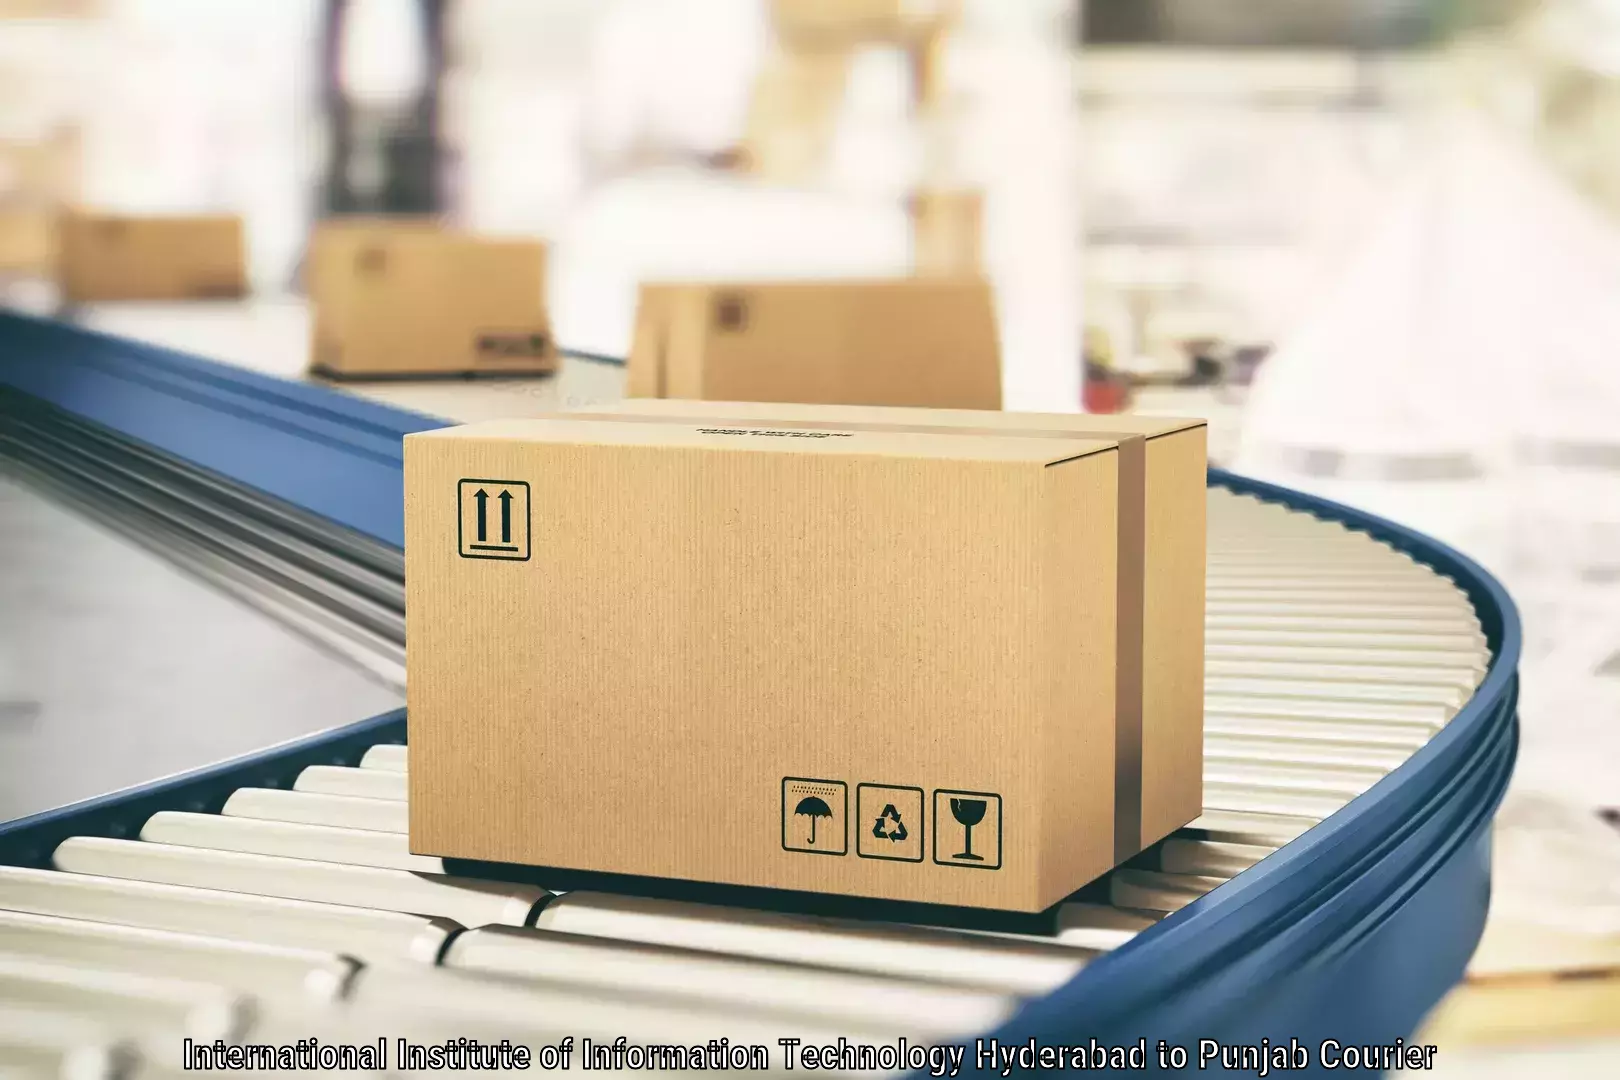 Customized shipping options International Institute of Information Technology Hyderabad to Mohali